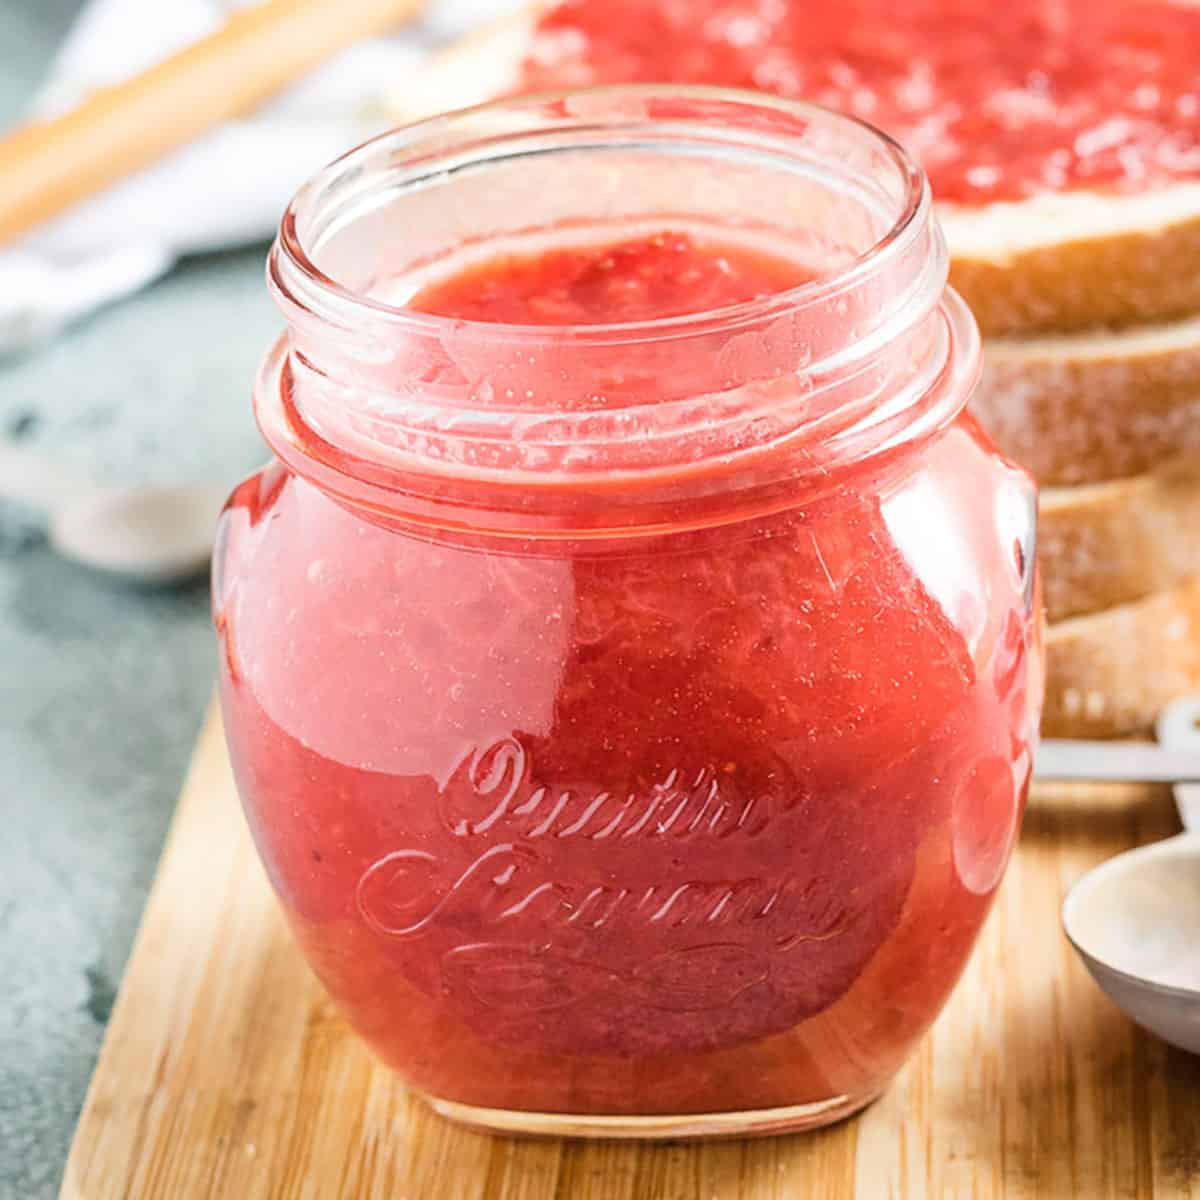 Strawberry jam featured image pantry recipes with substitutions